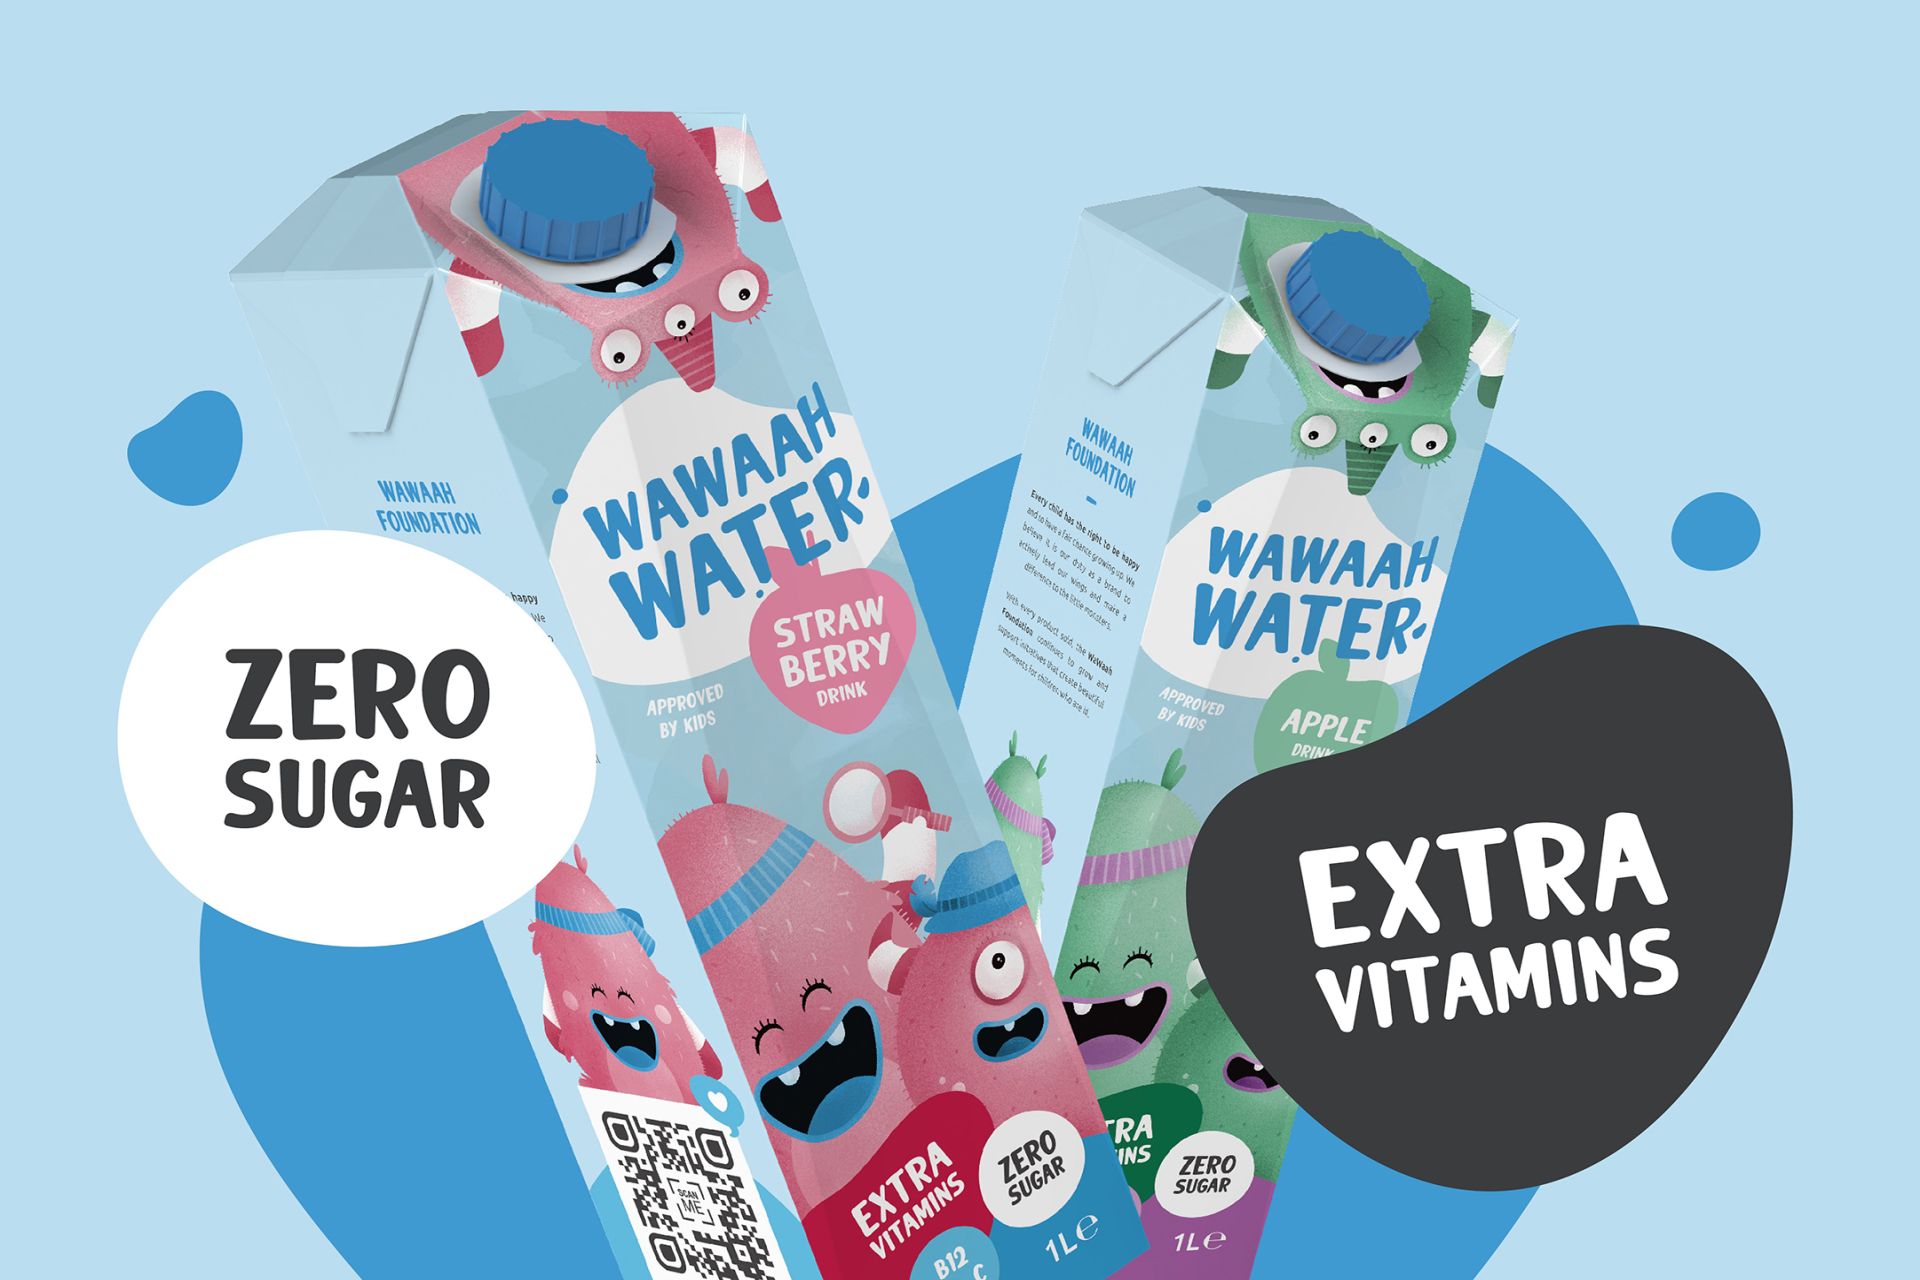 SIG chosen by WaWaah Water for new product packaging